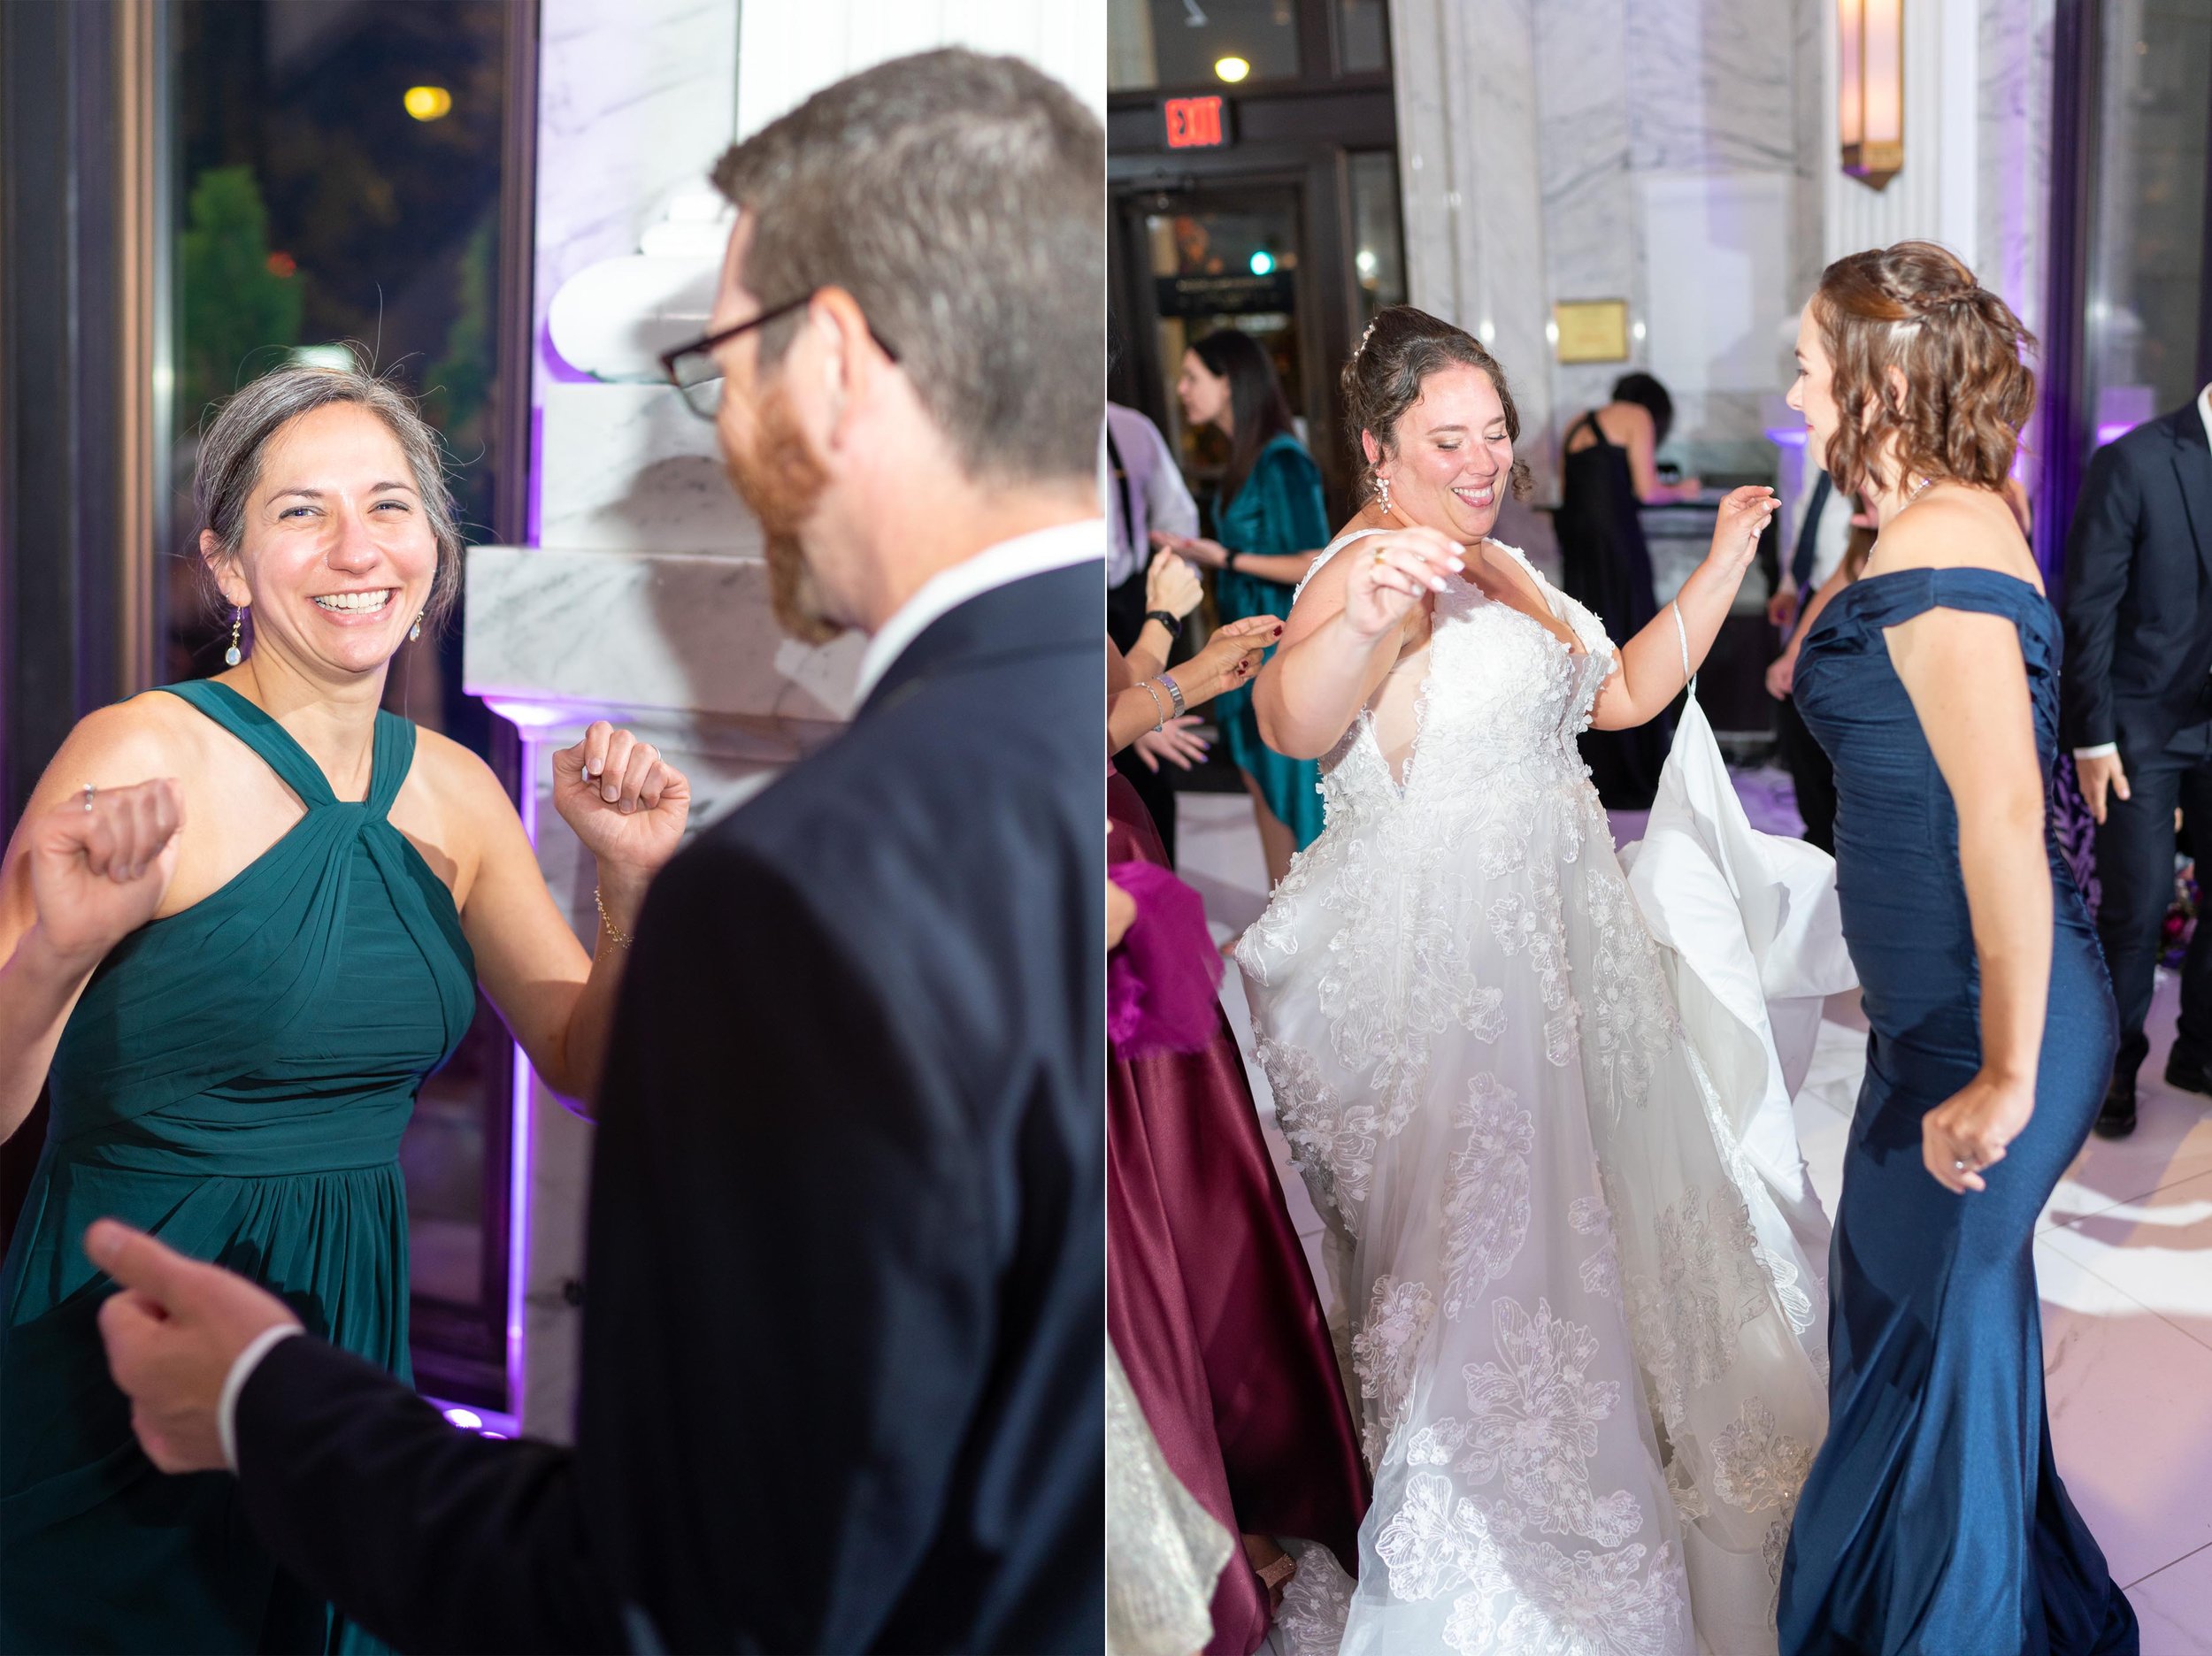 Wedding guests dancing at winter wedding in Frederick md at Citizen's ballroom